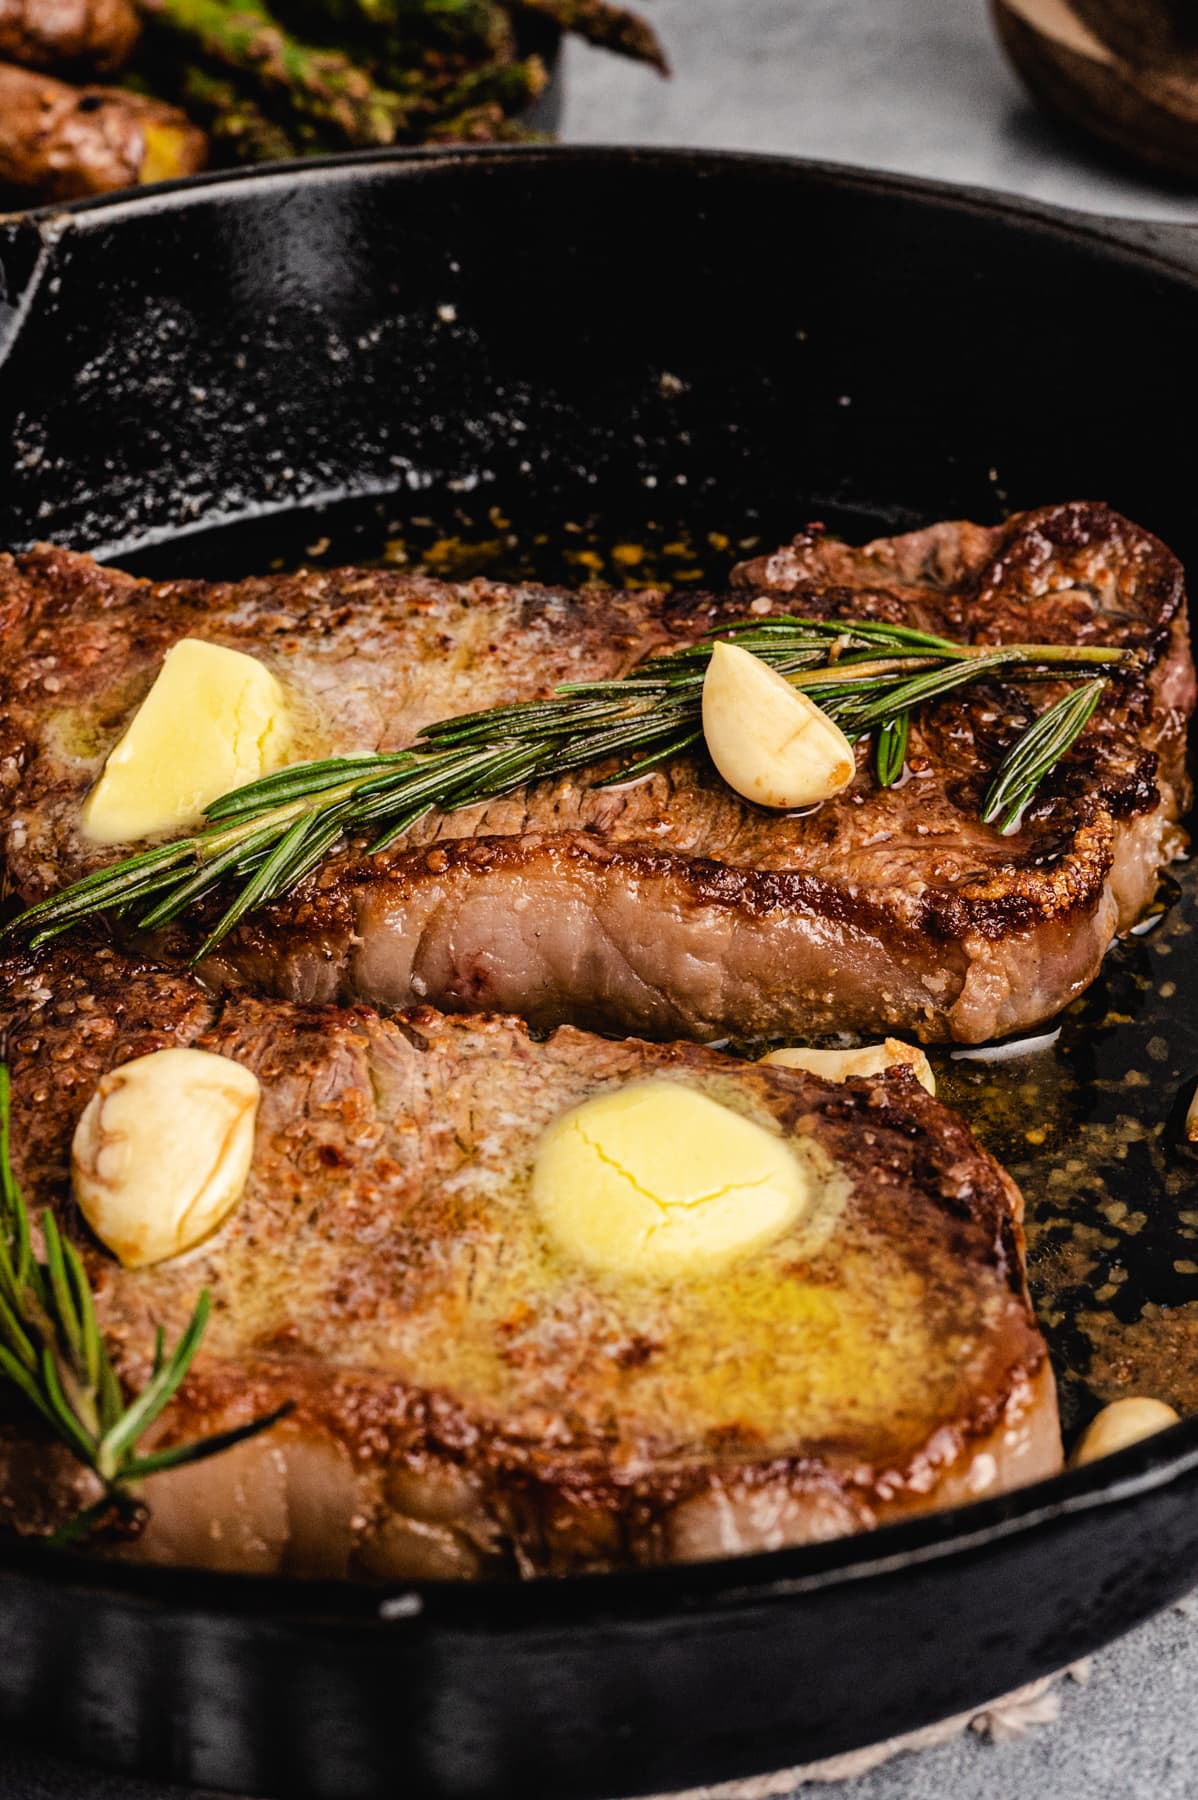 Pan seared steak topped with butter